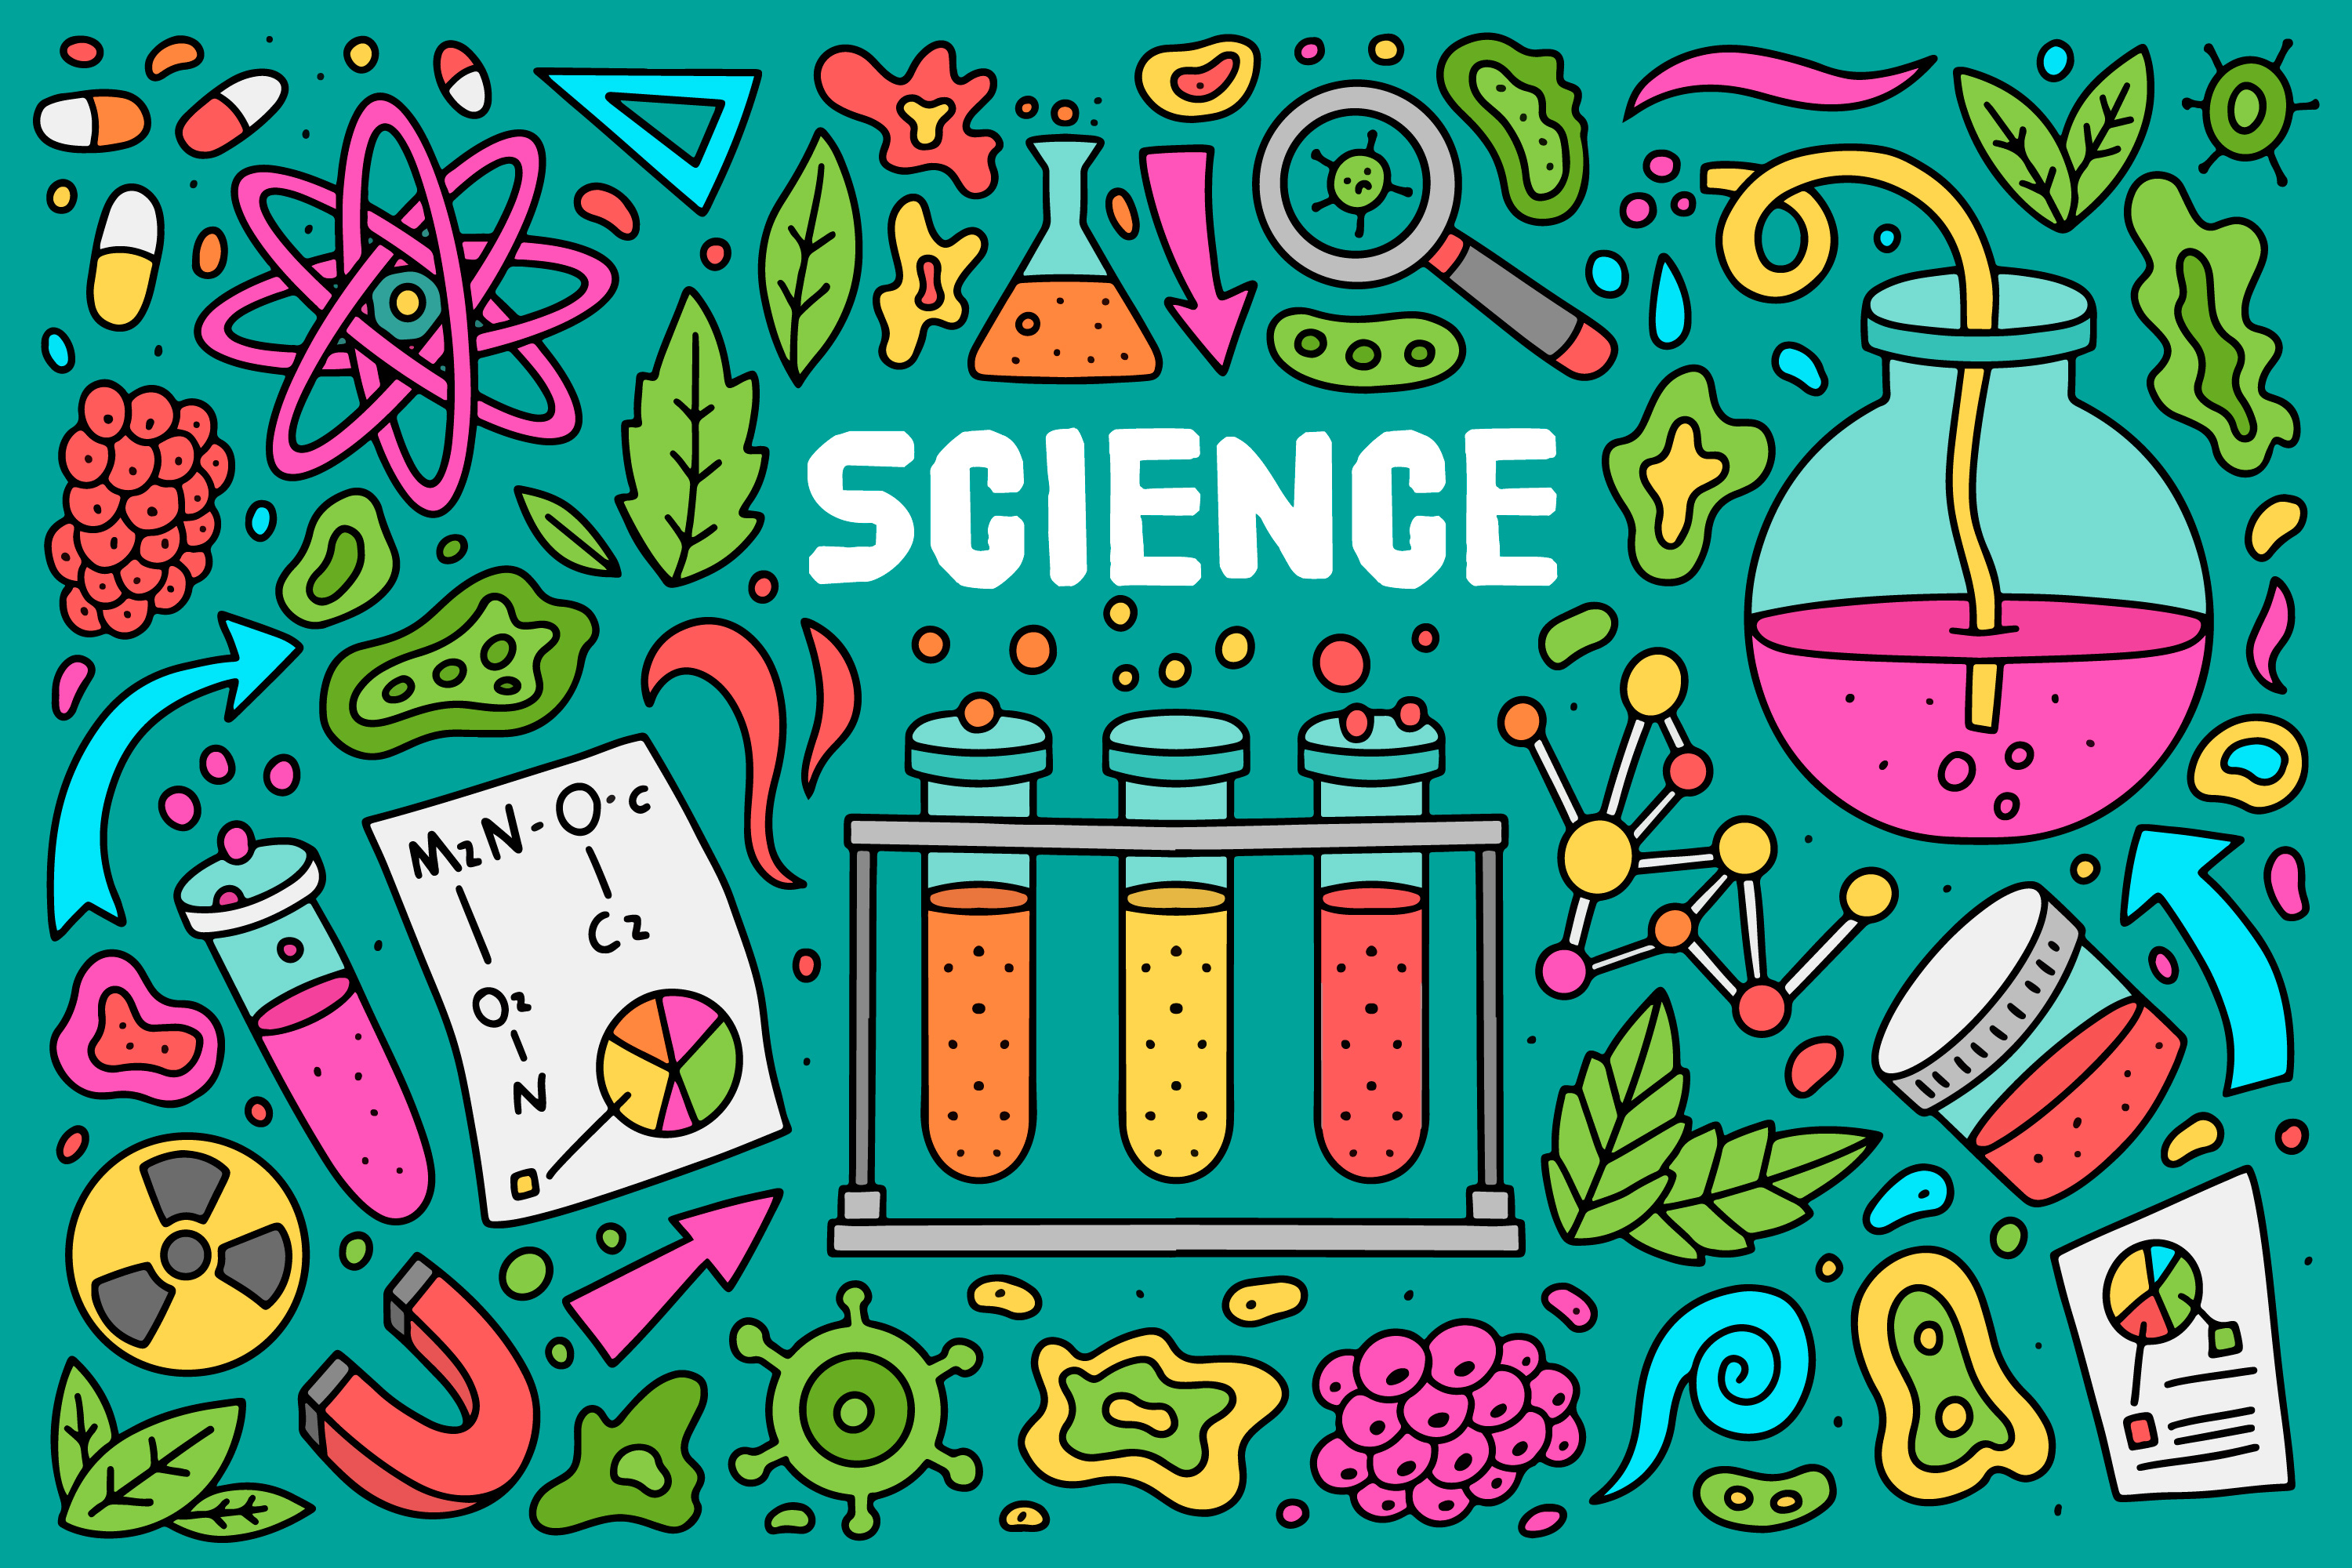 The word science surrounded by colorful hand drawn images of beakers, flasks, and math on a dark green background